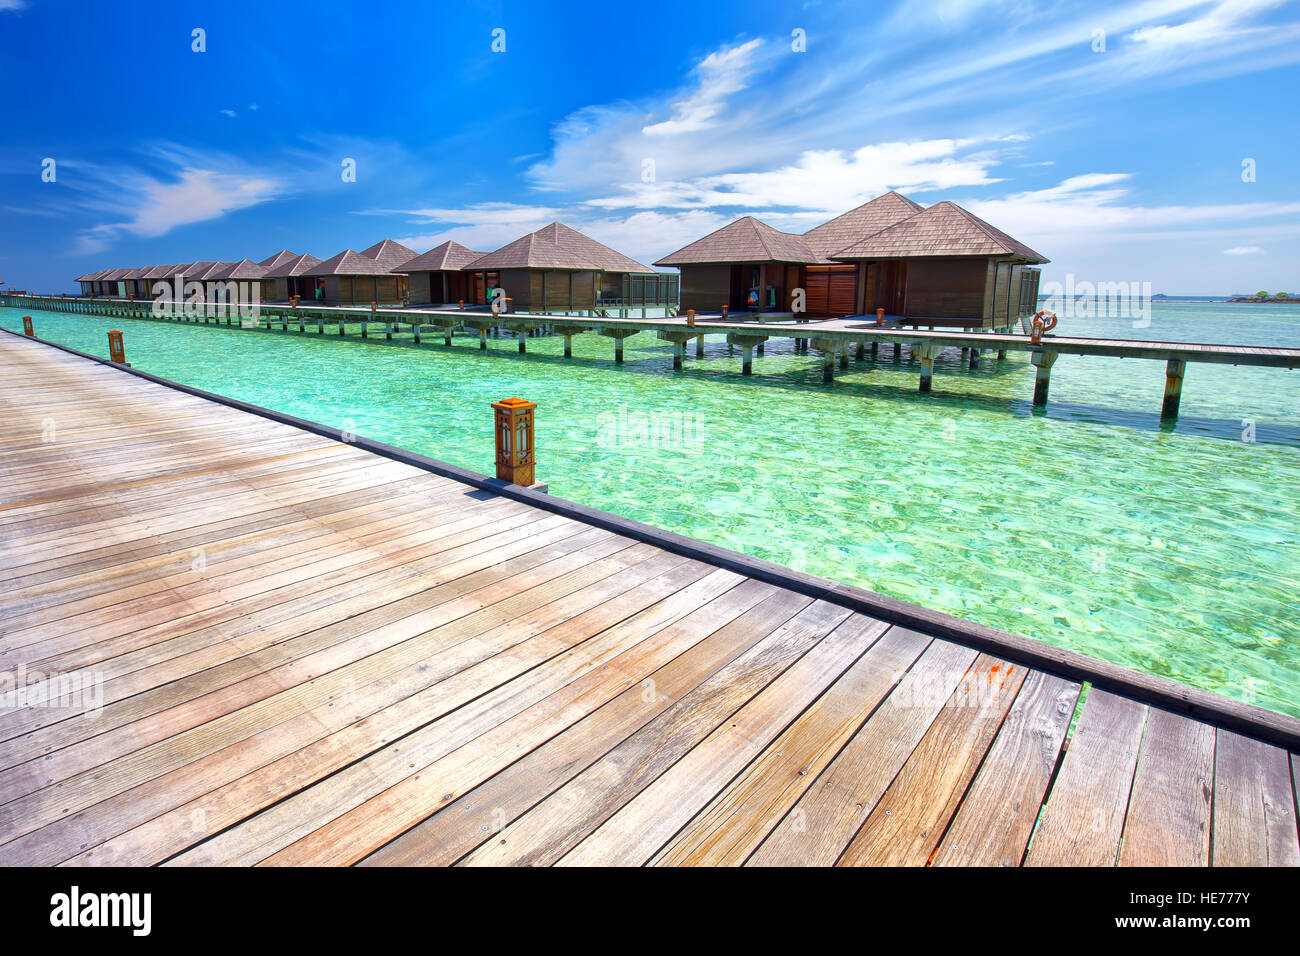 Luxurious water bungalows on tropical island with tourquise clear water. Stock Photo